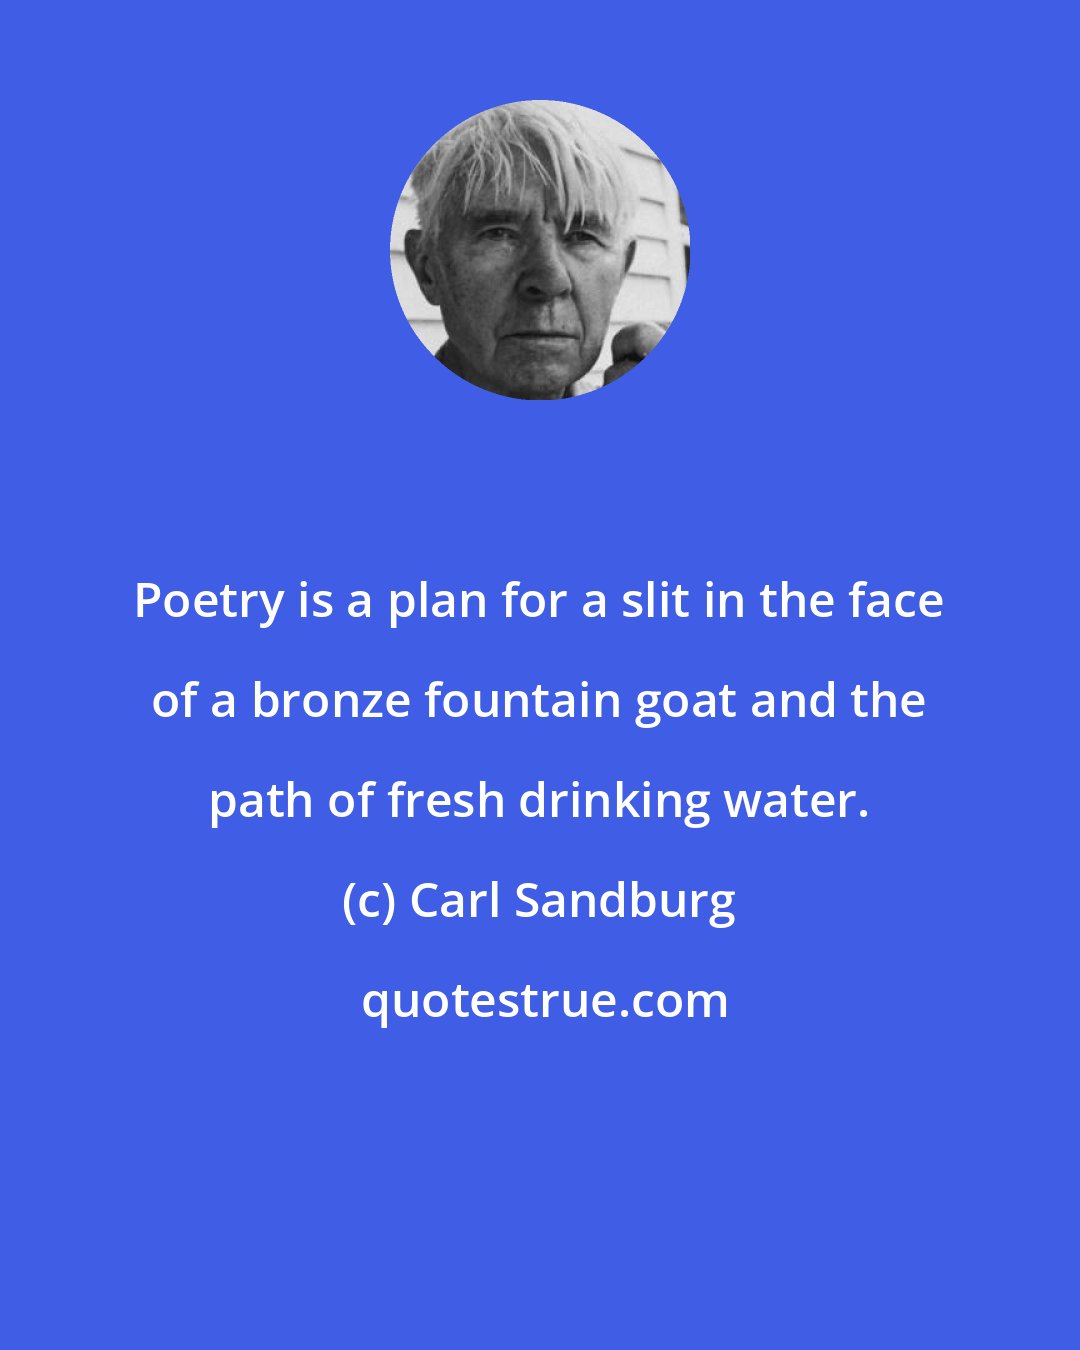 Carl Sandburg: Poetry is a plan for a slit in the face of a bronze fountain goat and the path of fresh drinking water.